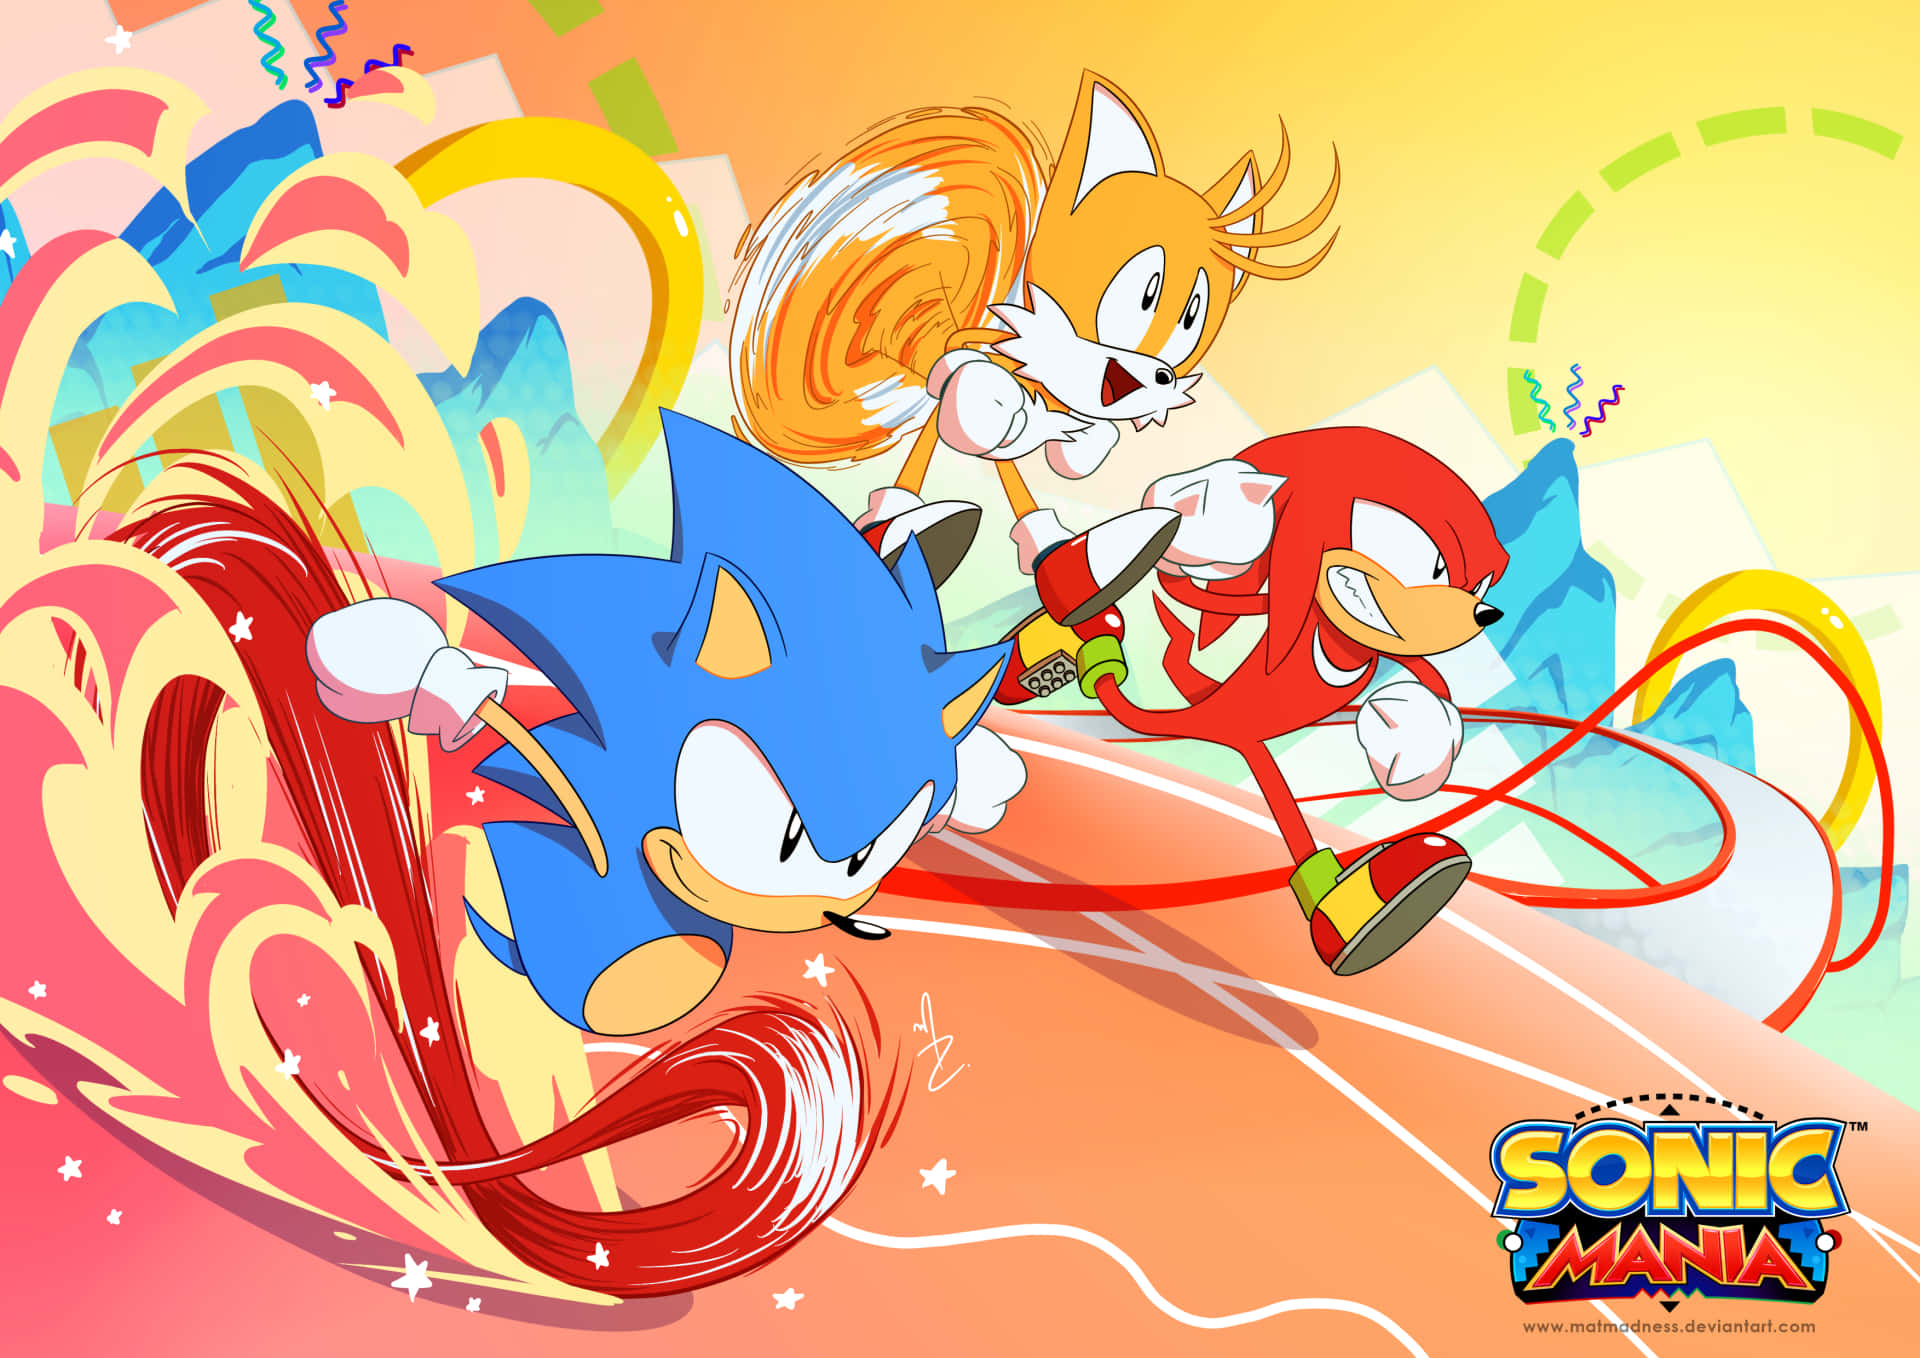 Play The Ultimate Classic Side-scroller With Sonic Mania!